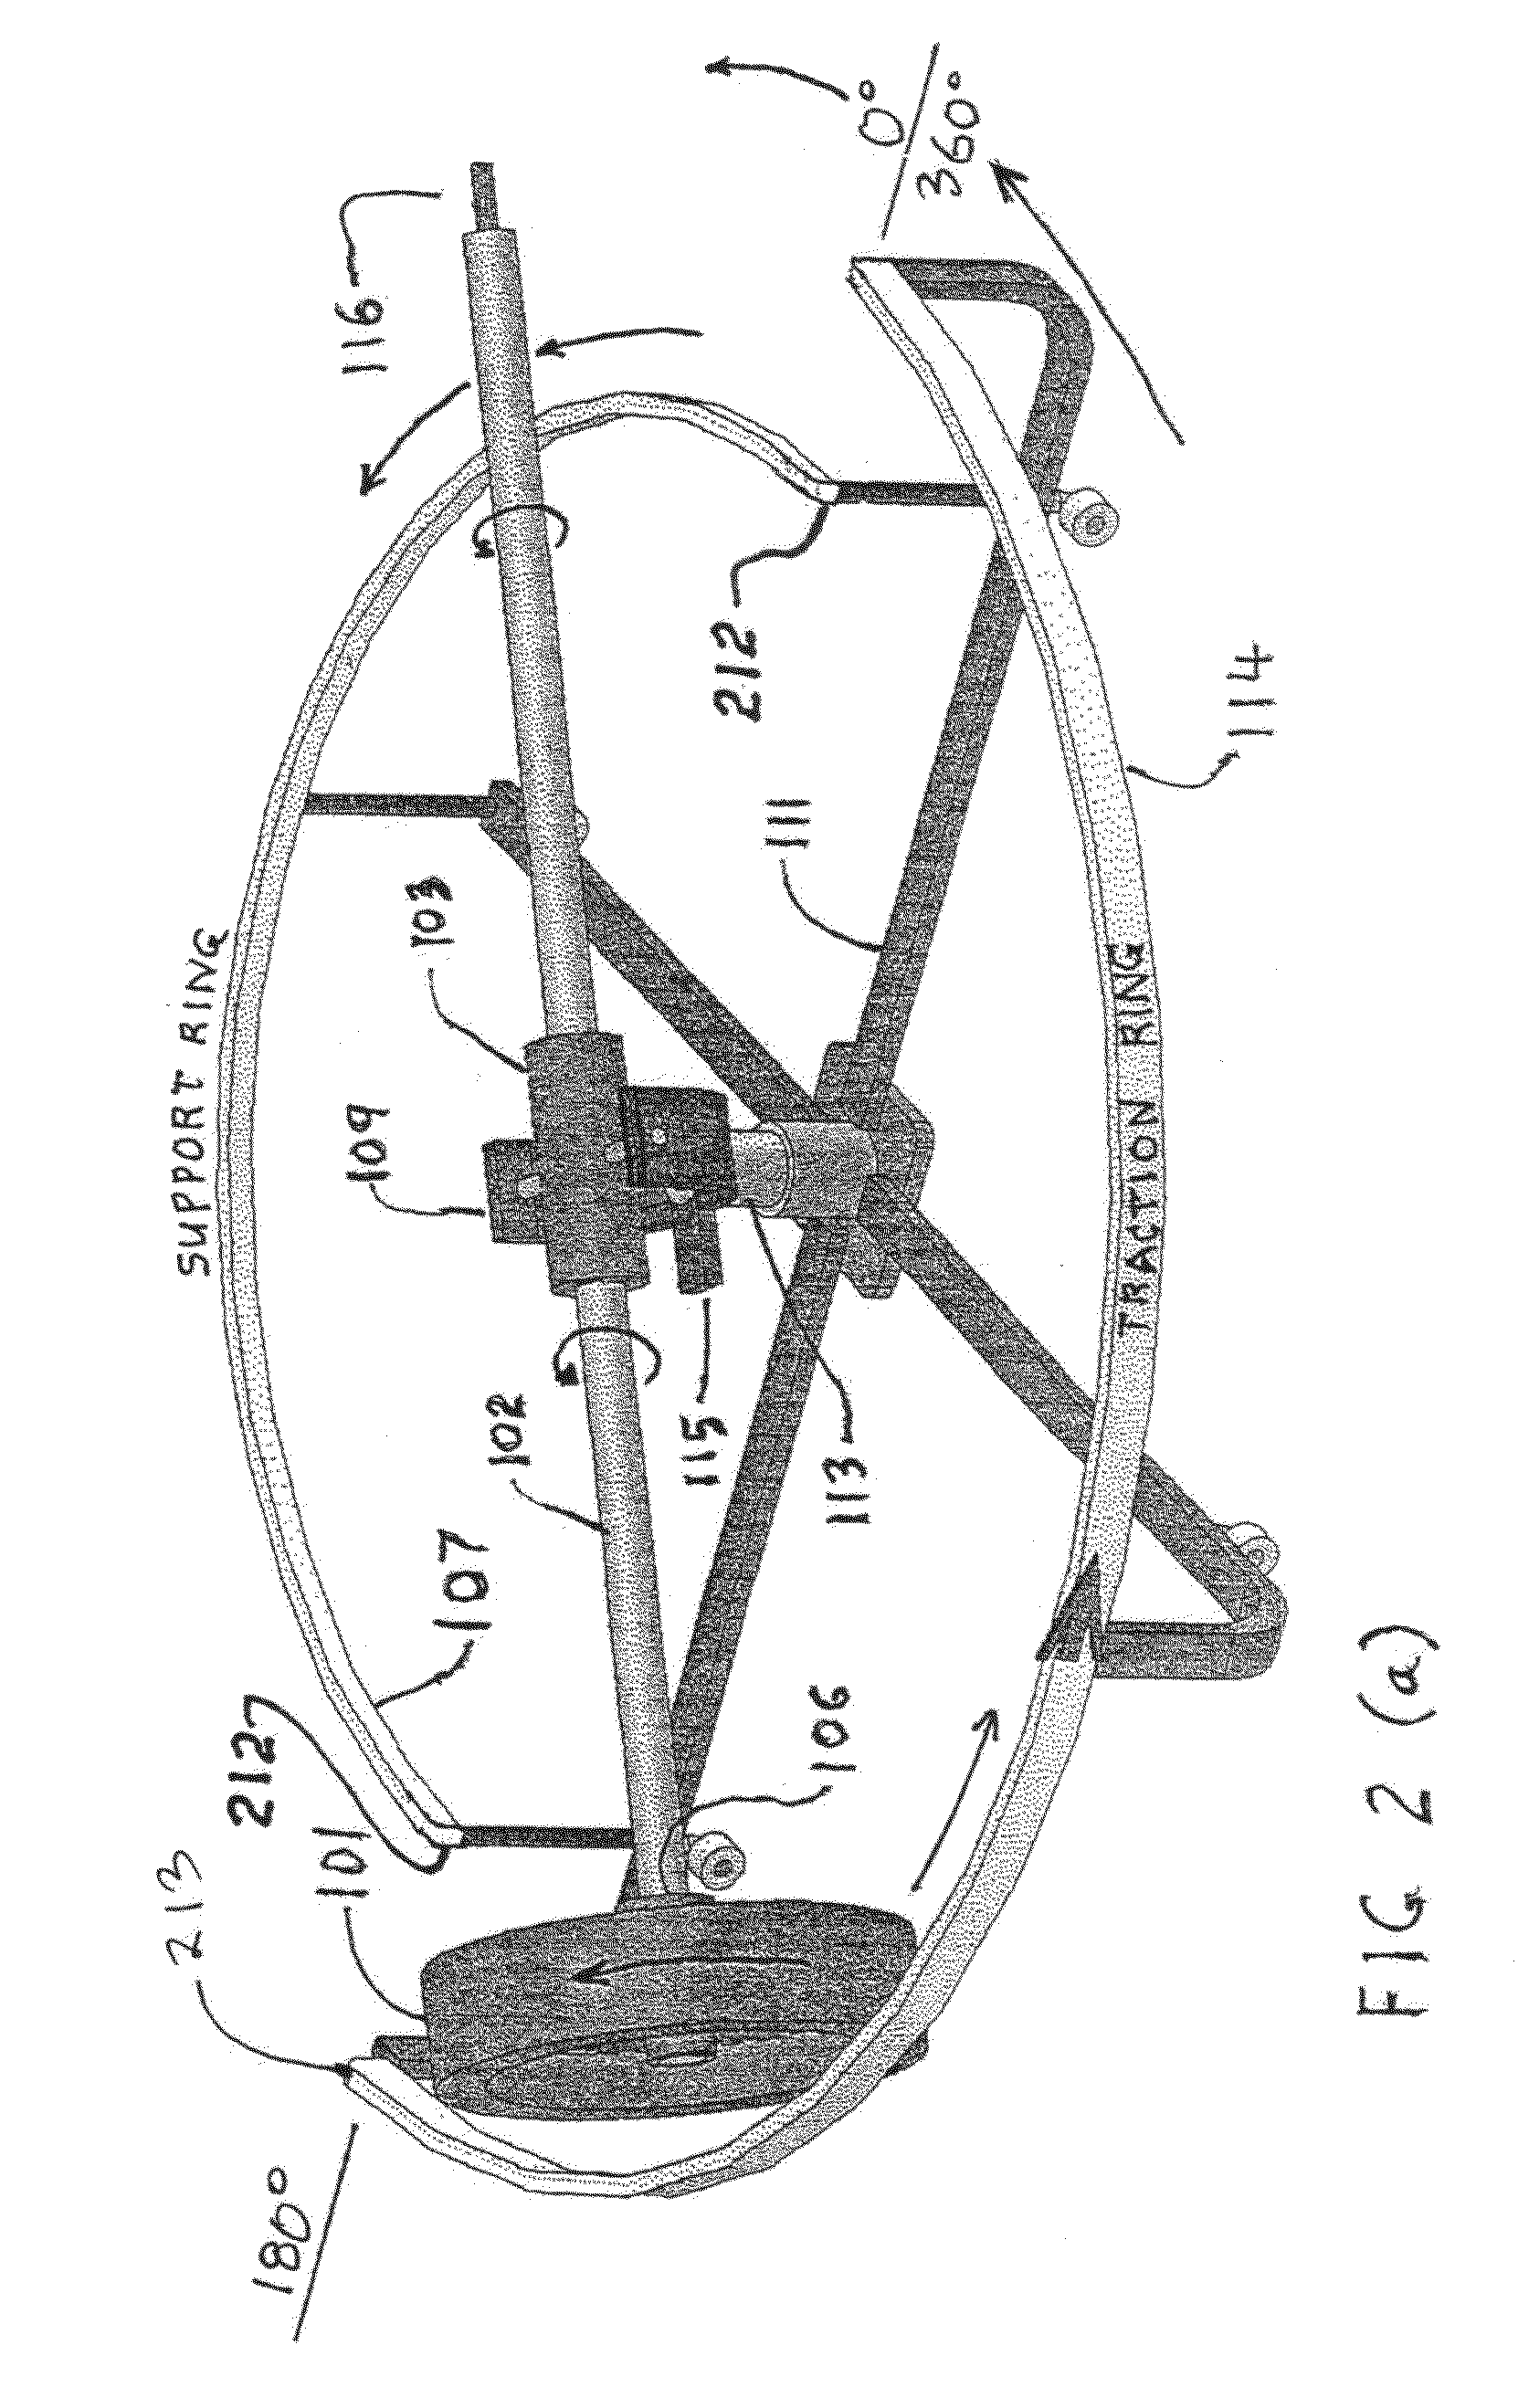 Inertial propulsion device to move an object up and down